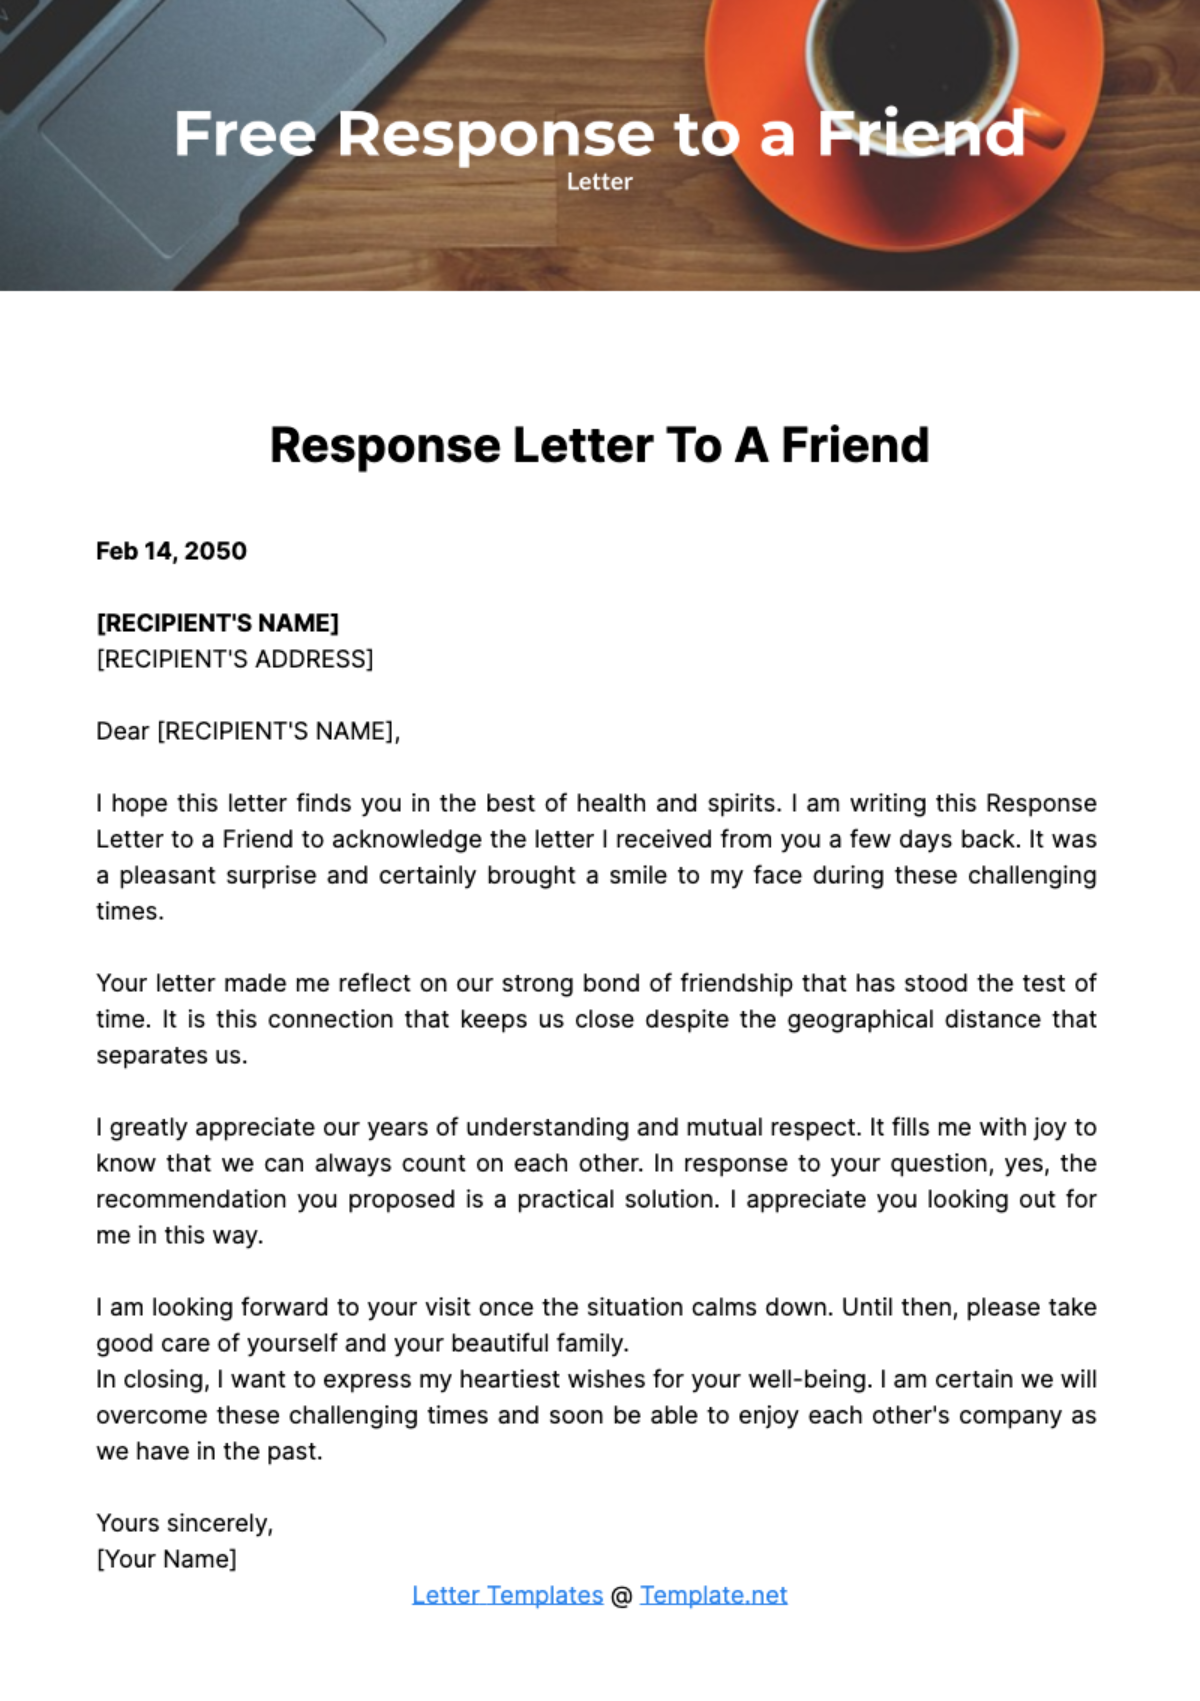 Response Letter to a Friend Template